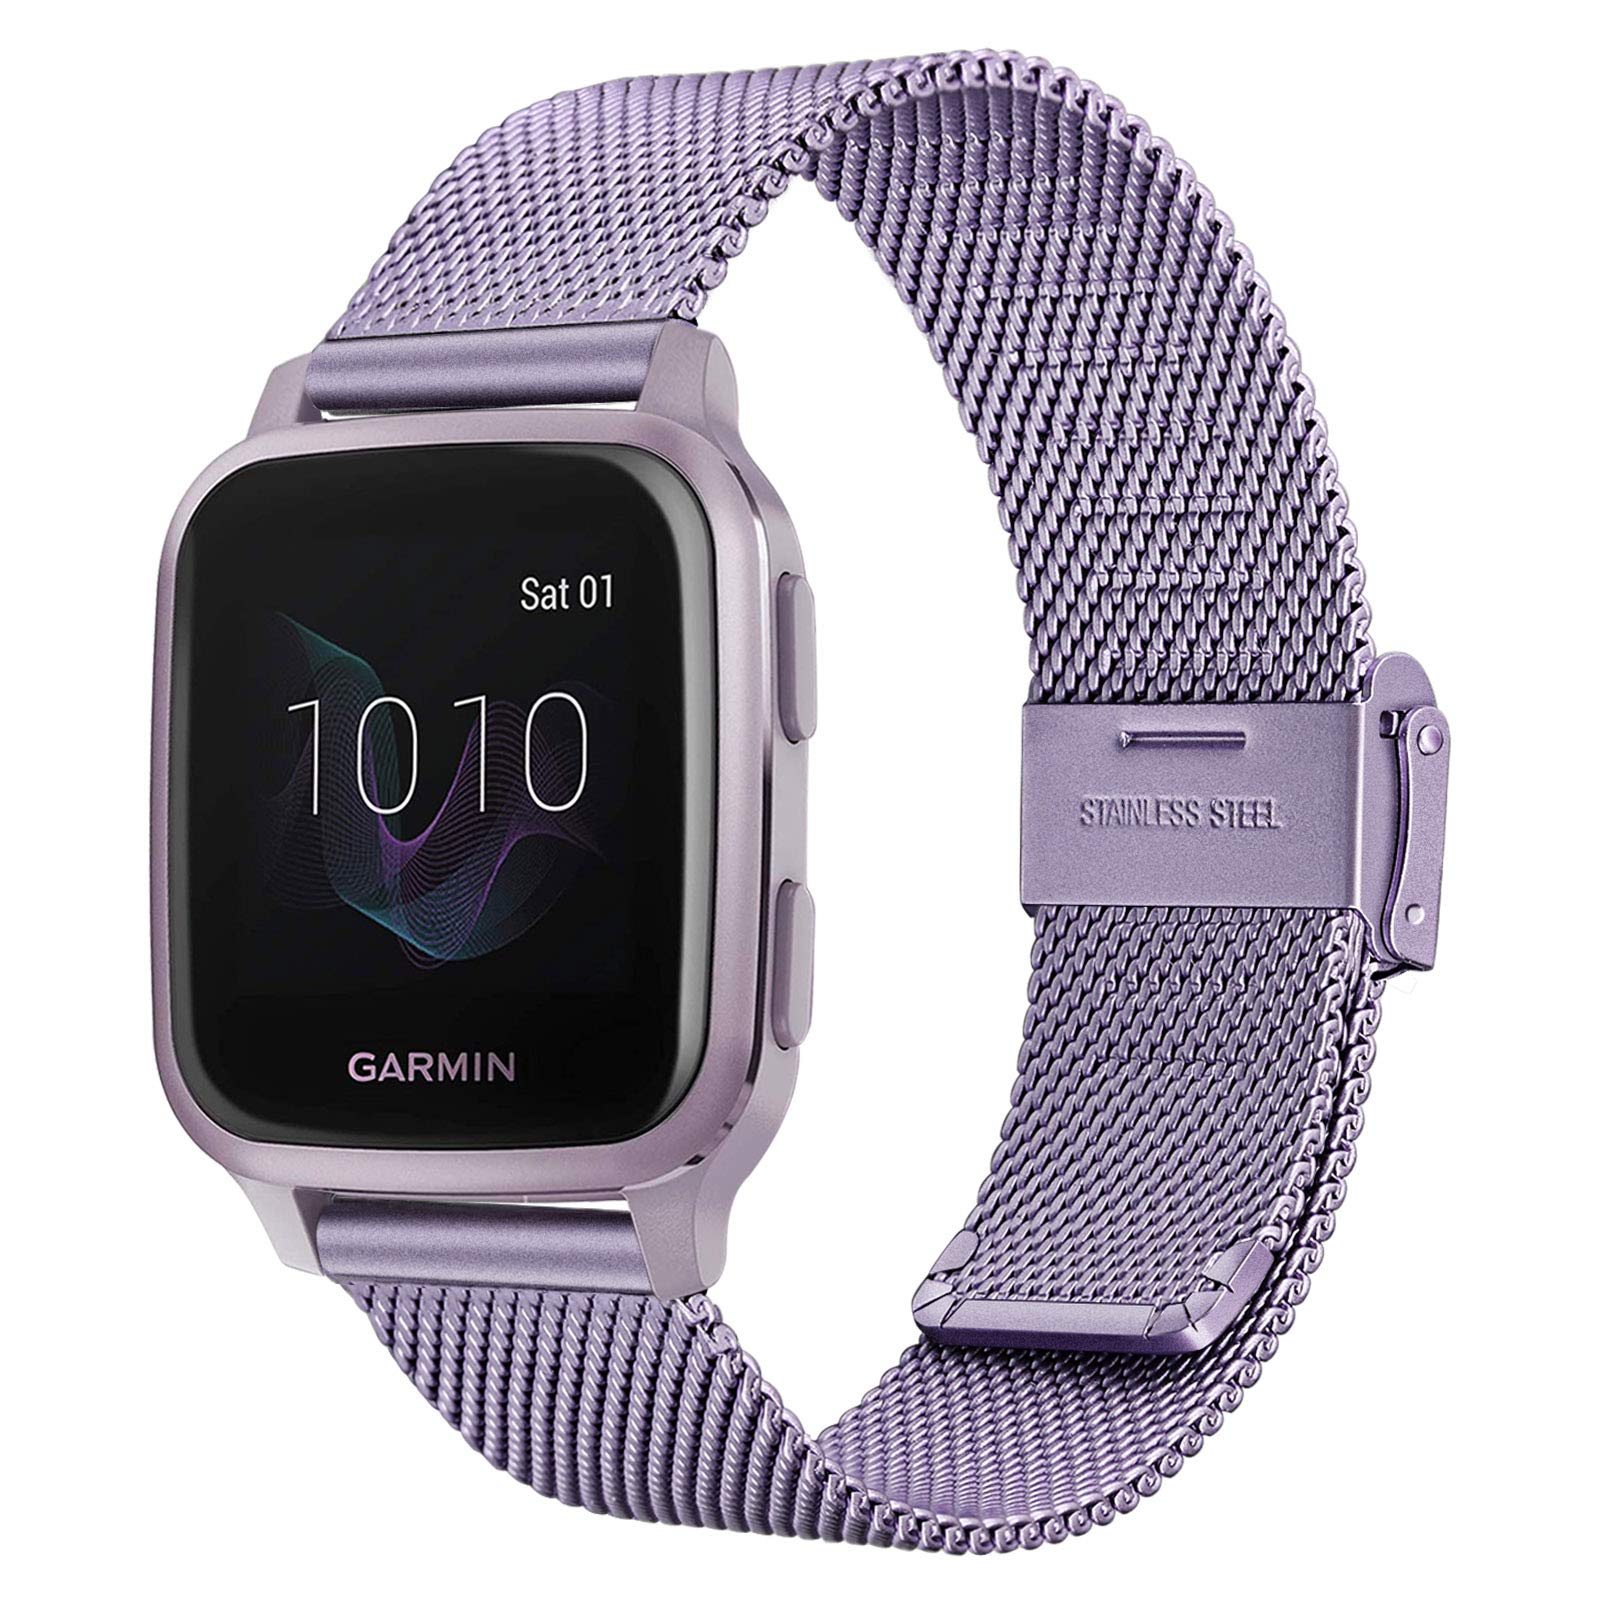  Garmin 010-02427-02 Venu Sq, GPS Smartwatch with Bright  Touchscreen Display, Up to 6 Days of Battery Life, Orchid Purple :  Electronics